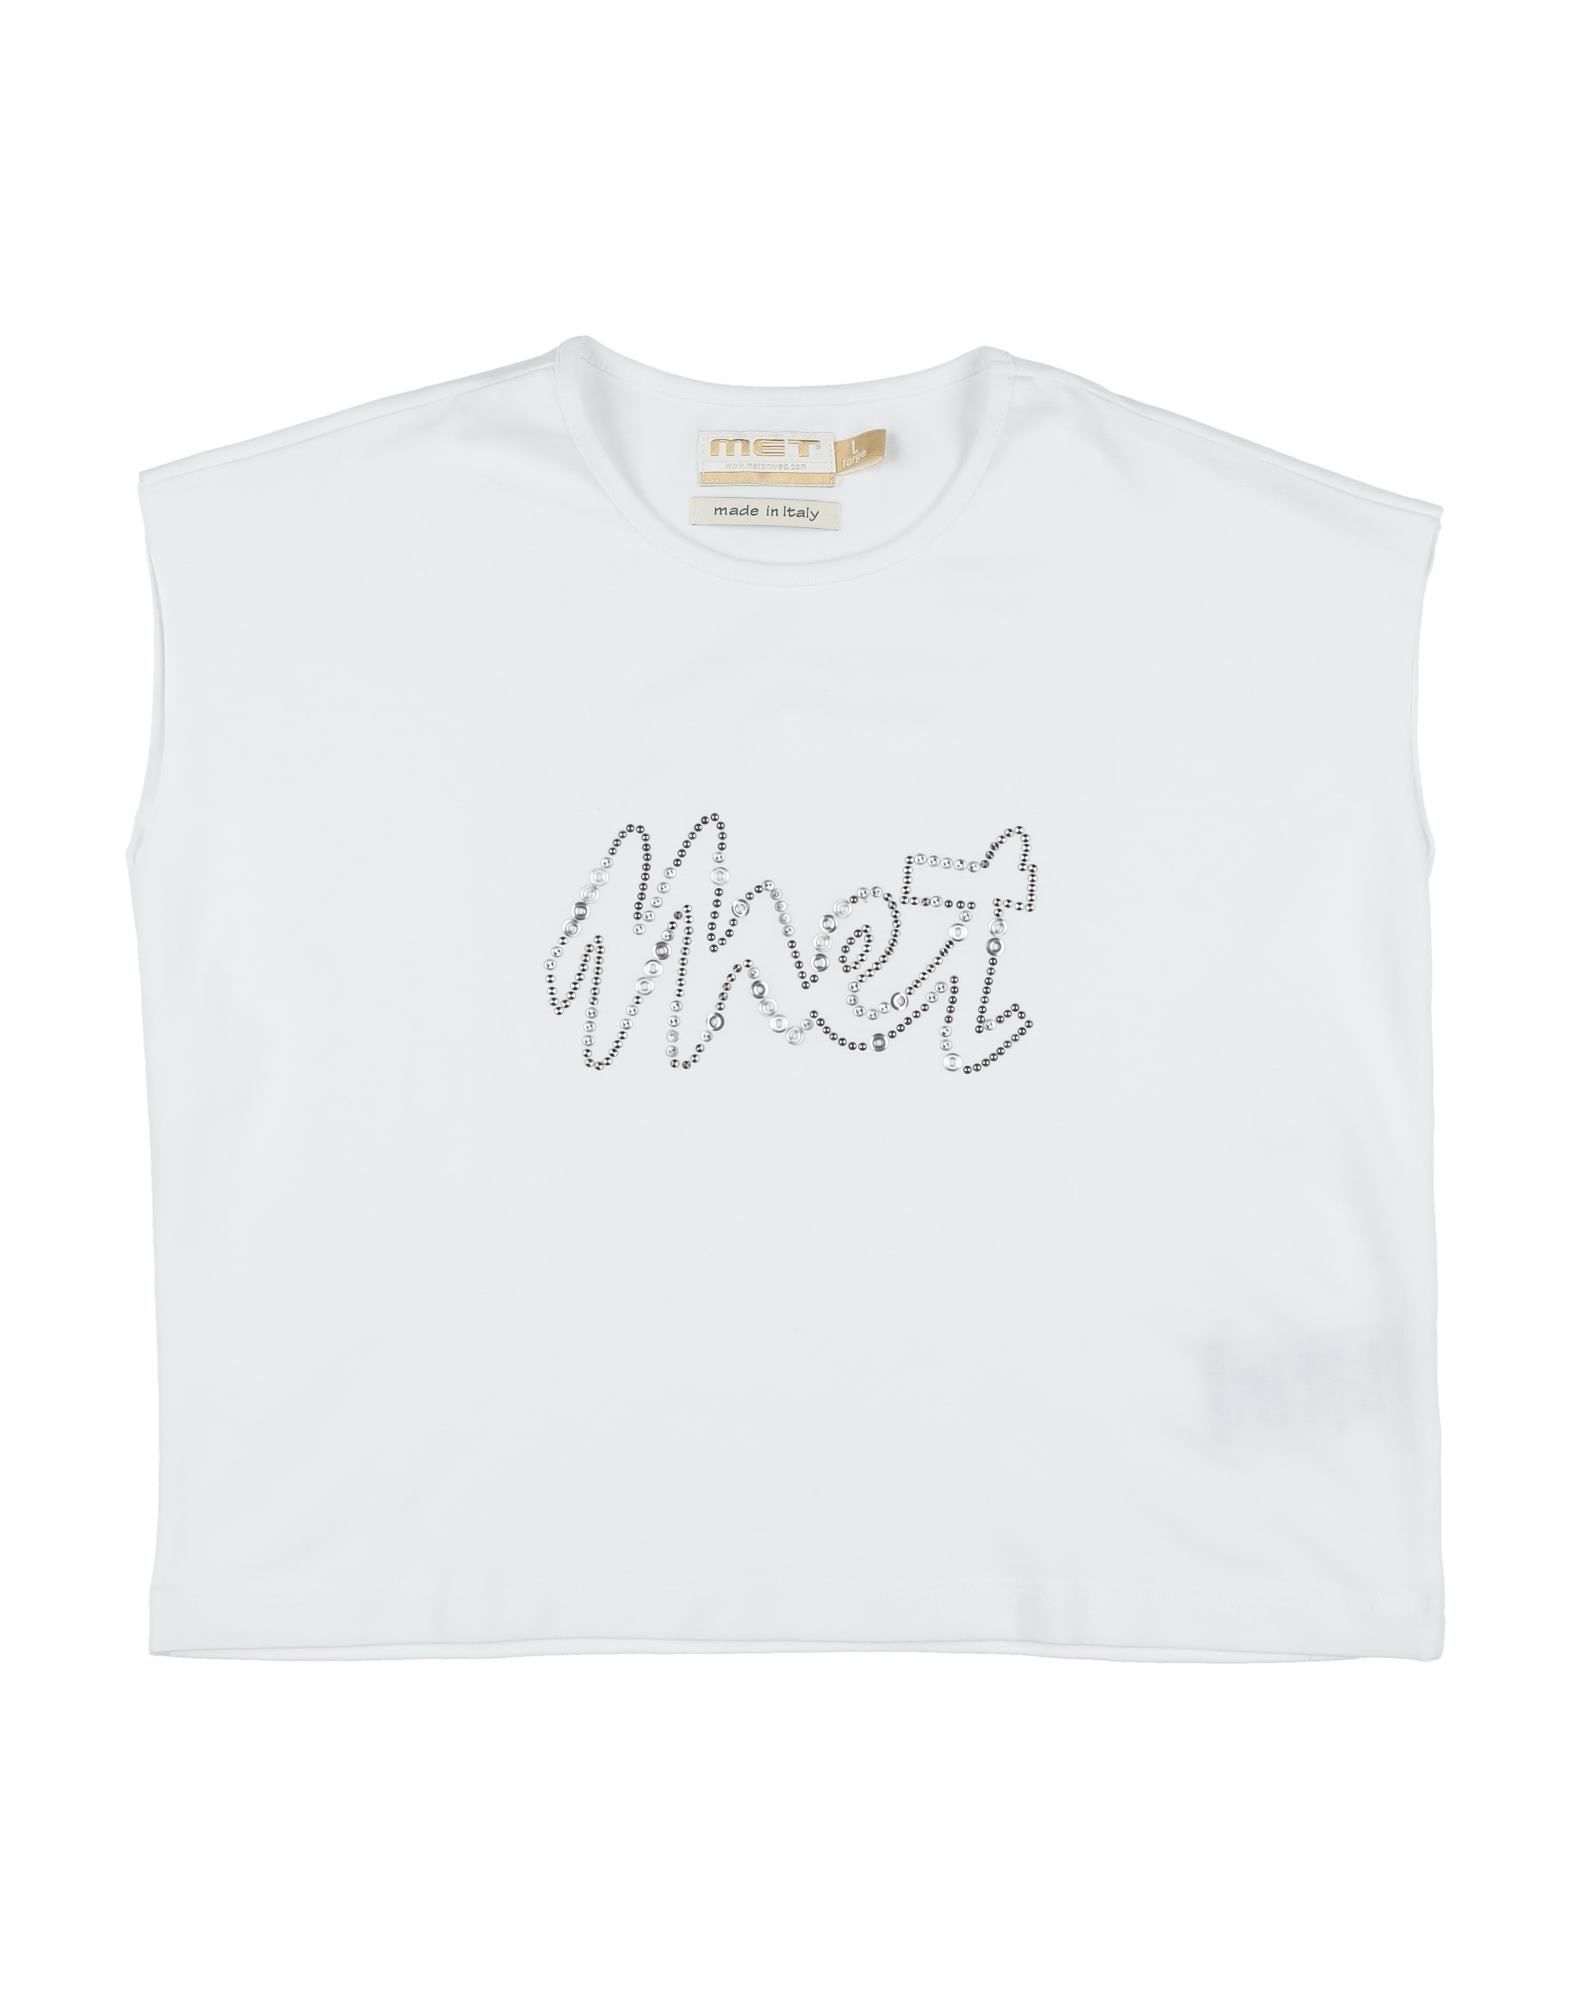 Met Jeans Kids' T-shirts In White